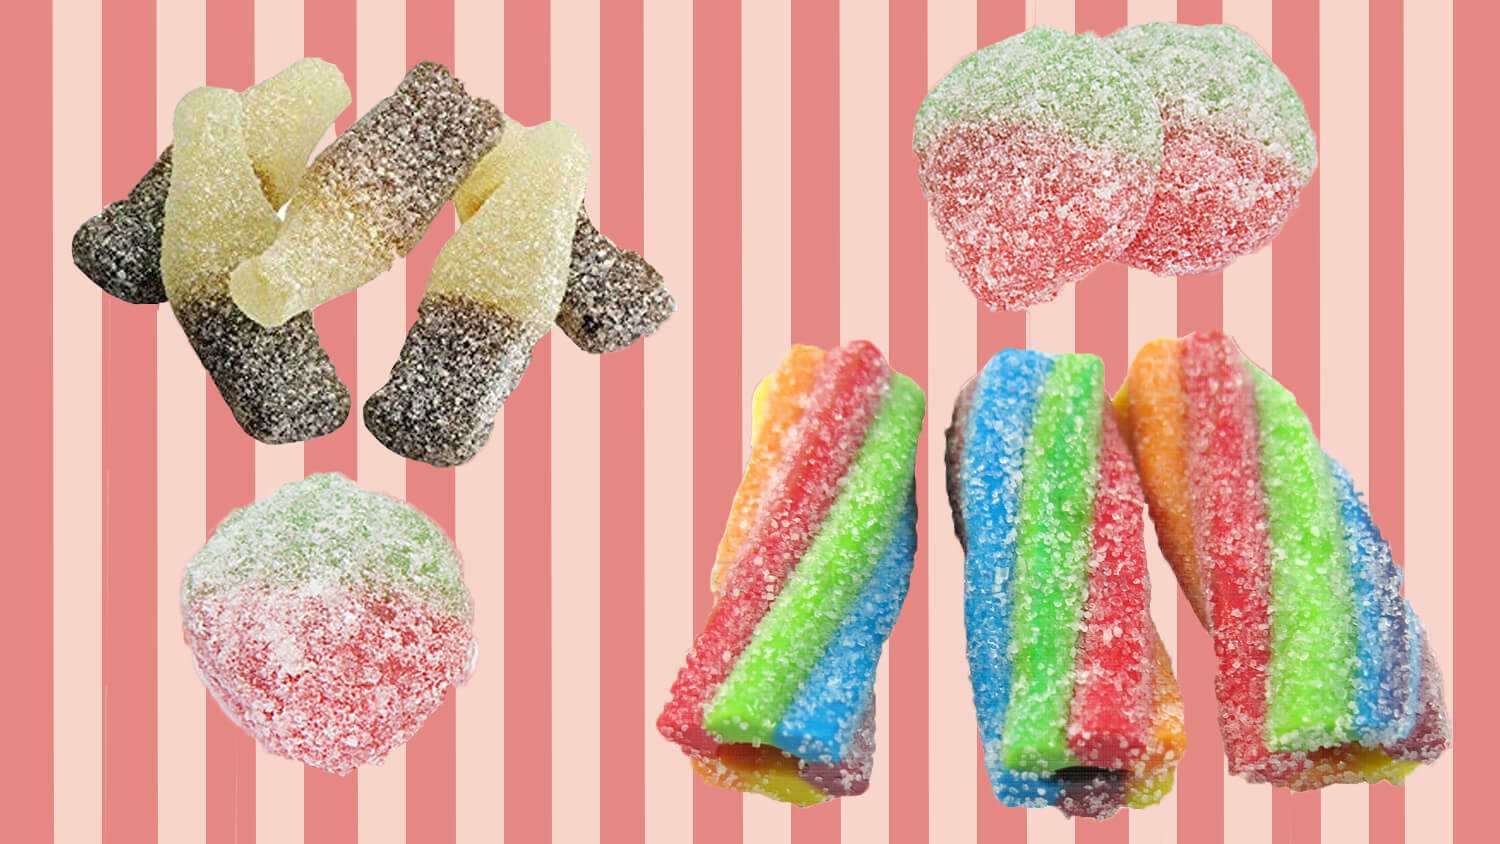 Vegan Pick 'n' Mix Sweets Available for Delivery in the UK By the Conscious Candy Company